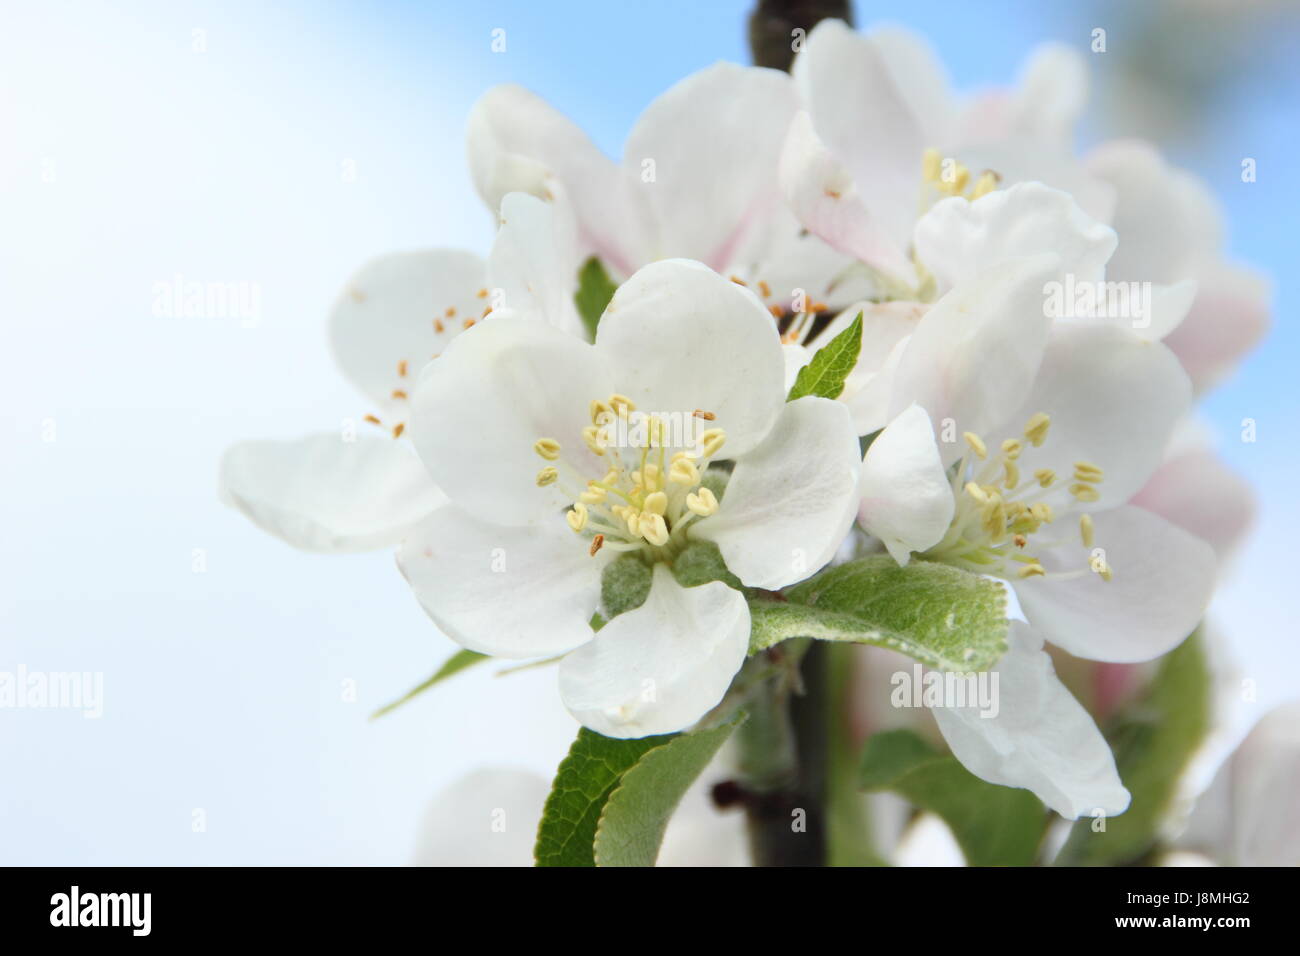 Malus domestica 'Discovery' apple tree in full bloom in an English orchard on a sunny spring day, England, UK Stock Photo